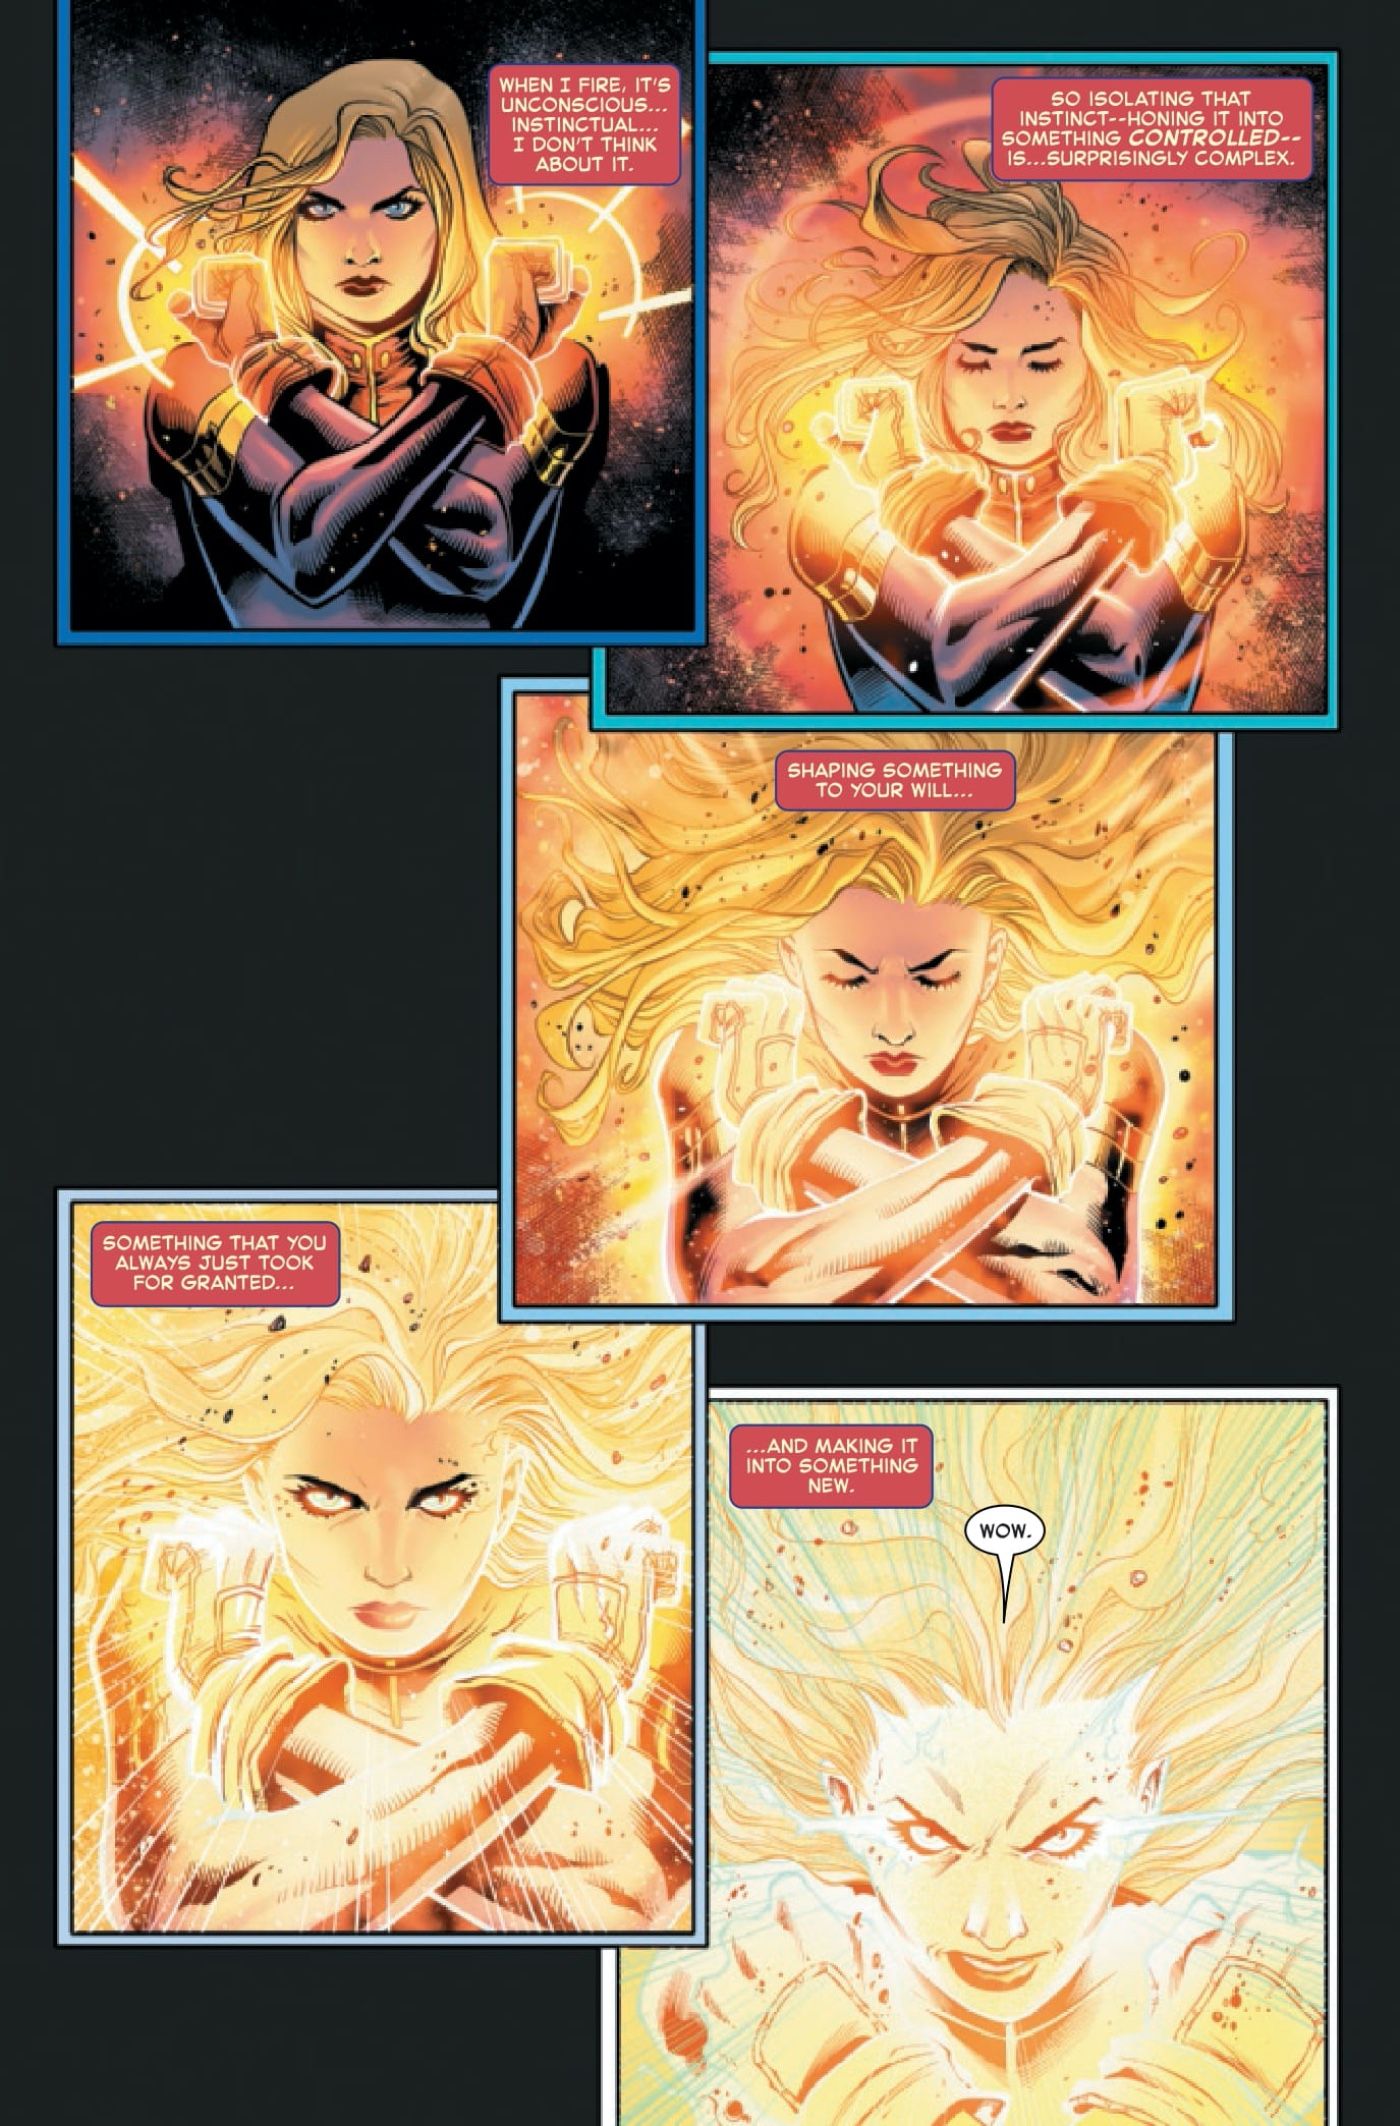 Captain Marvel 34 preview page, showing Carol trying to escape her prison using a trick she learned from Monica Rambeau